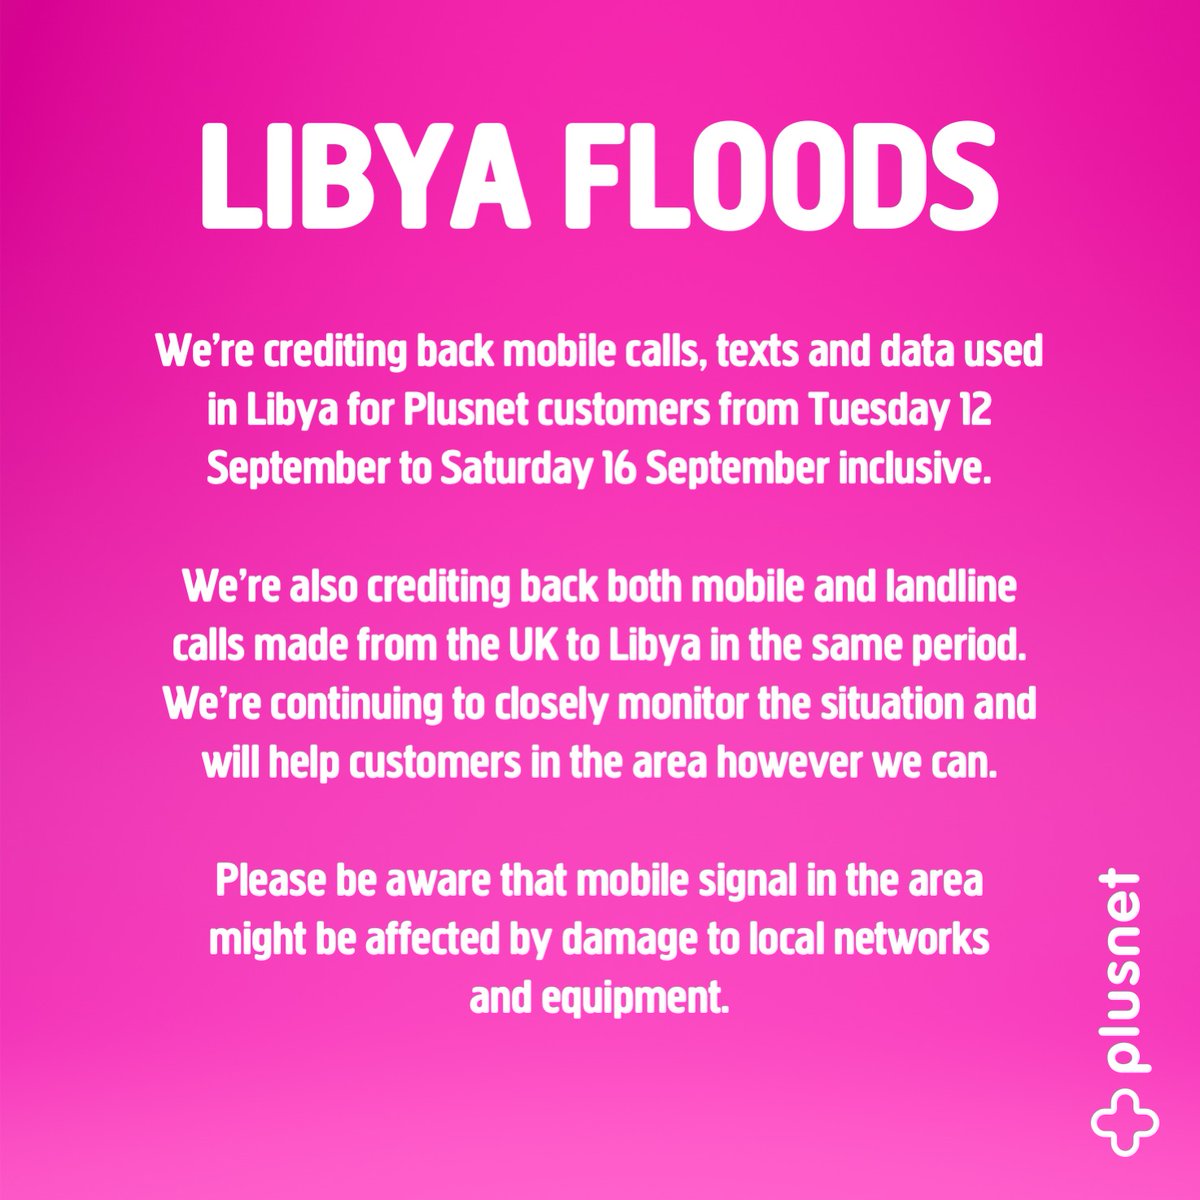 We’re crediting back mobile calls, texts and data used in Libya for Plusnet customers from 12th-16th September (inclusive). We’re also crediting back mobile and landline calls made from the UK to Libya in this period. Please be aware mobile signal in the area might be affected.